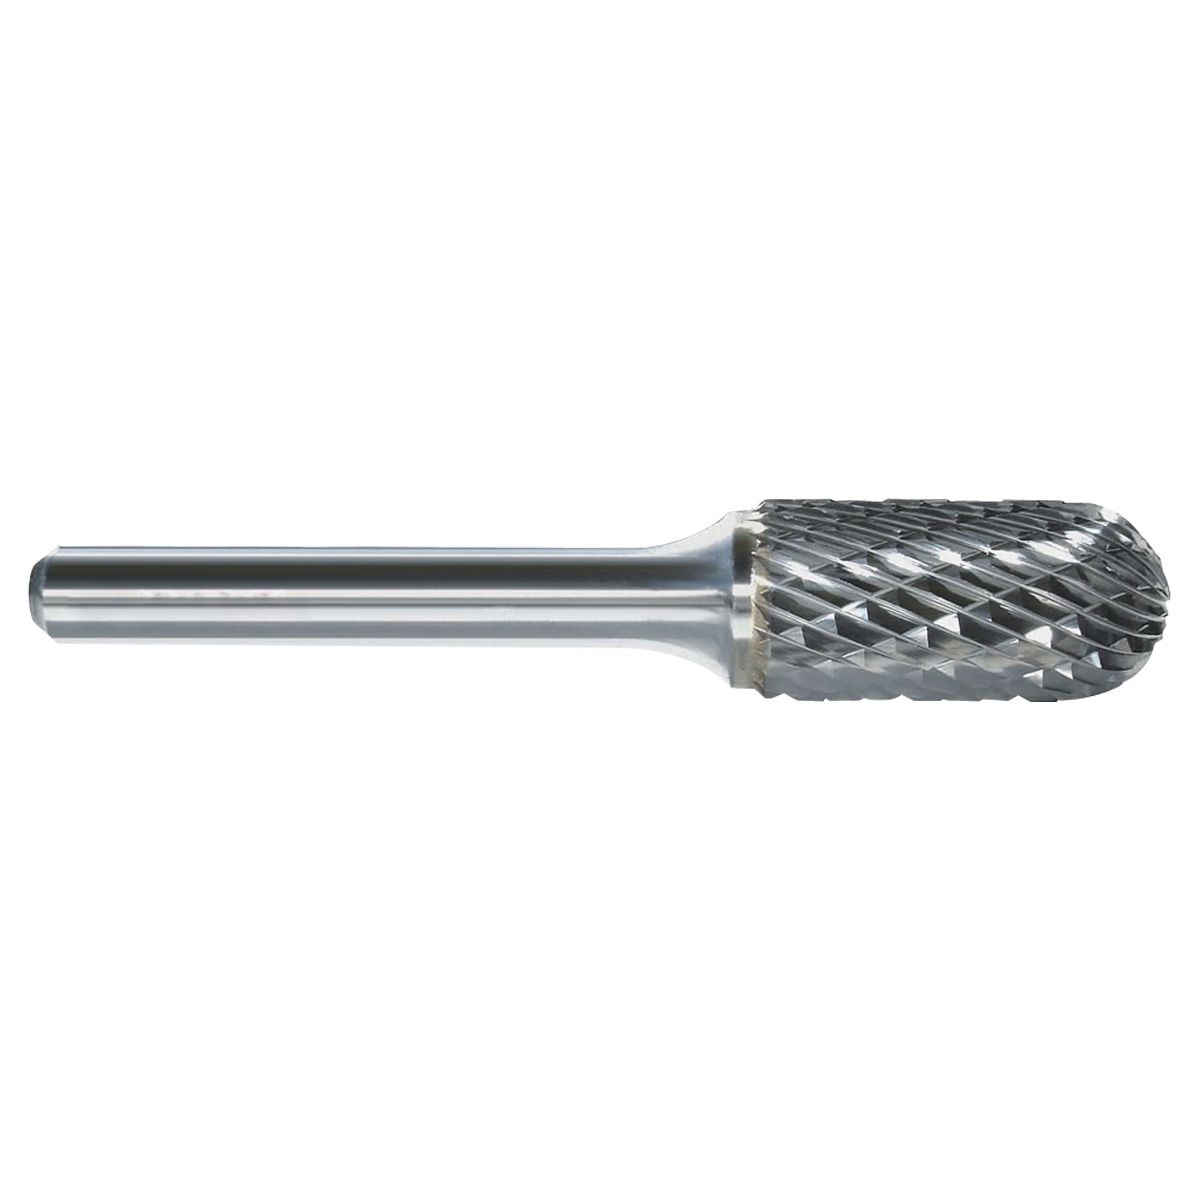 SC-7 CYLINDRICAL BALL NOSE DOUBLE-CUT CARBIDE BURRS (3000-0117)